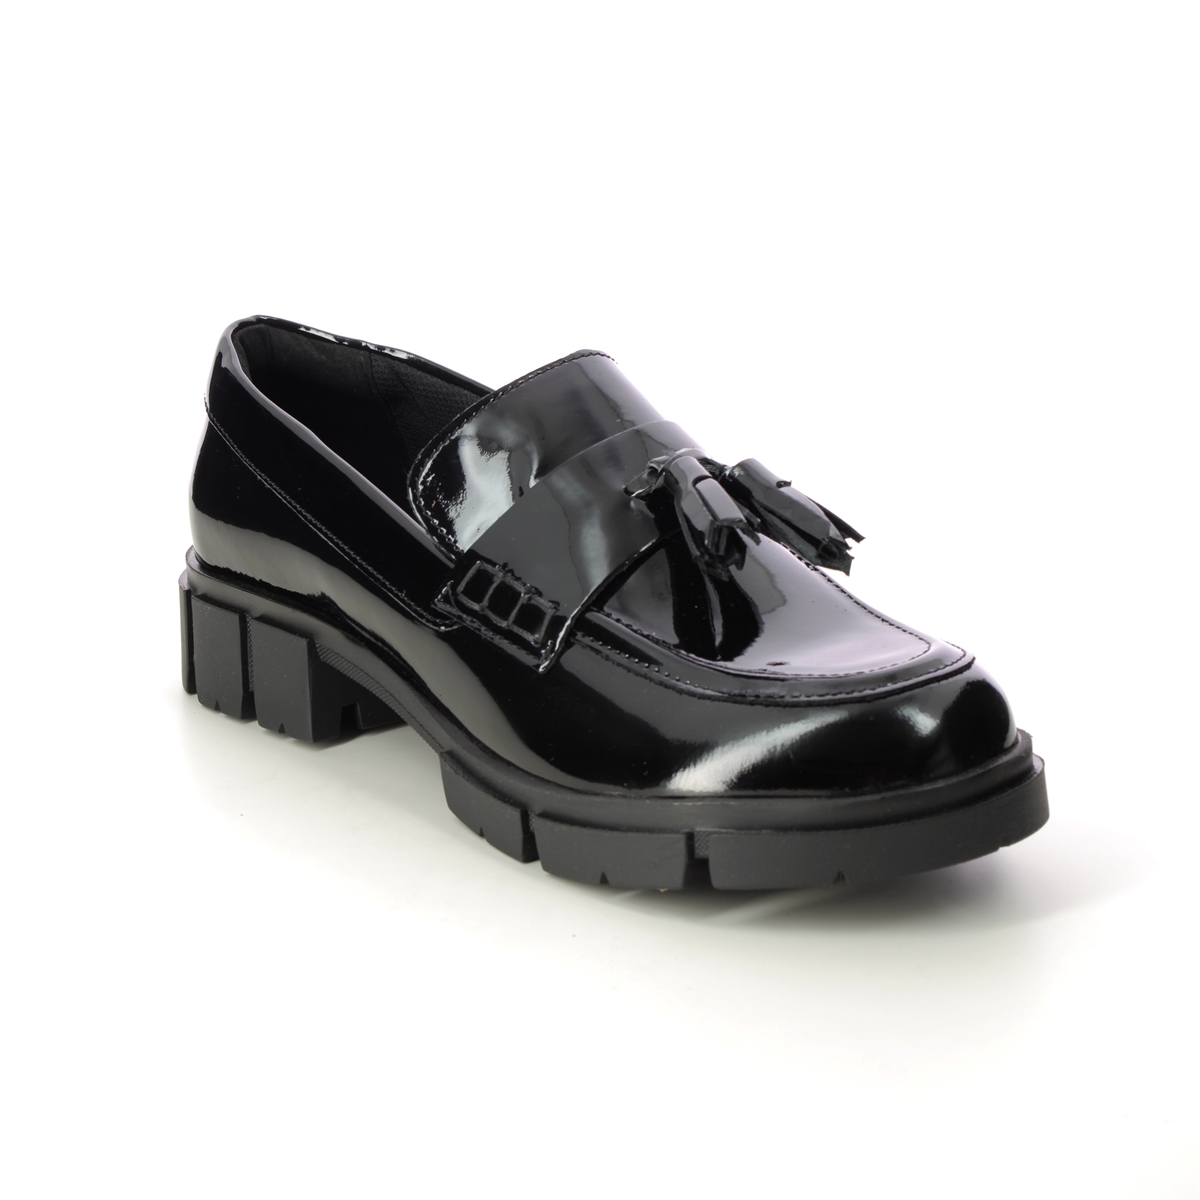 Clarks Teala Loafer Black Patent Womens Loafers 689984D In Size 4 In Plain Black Patent